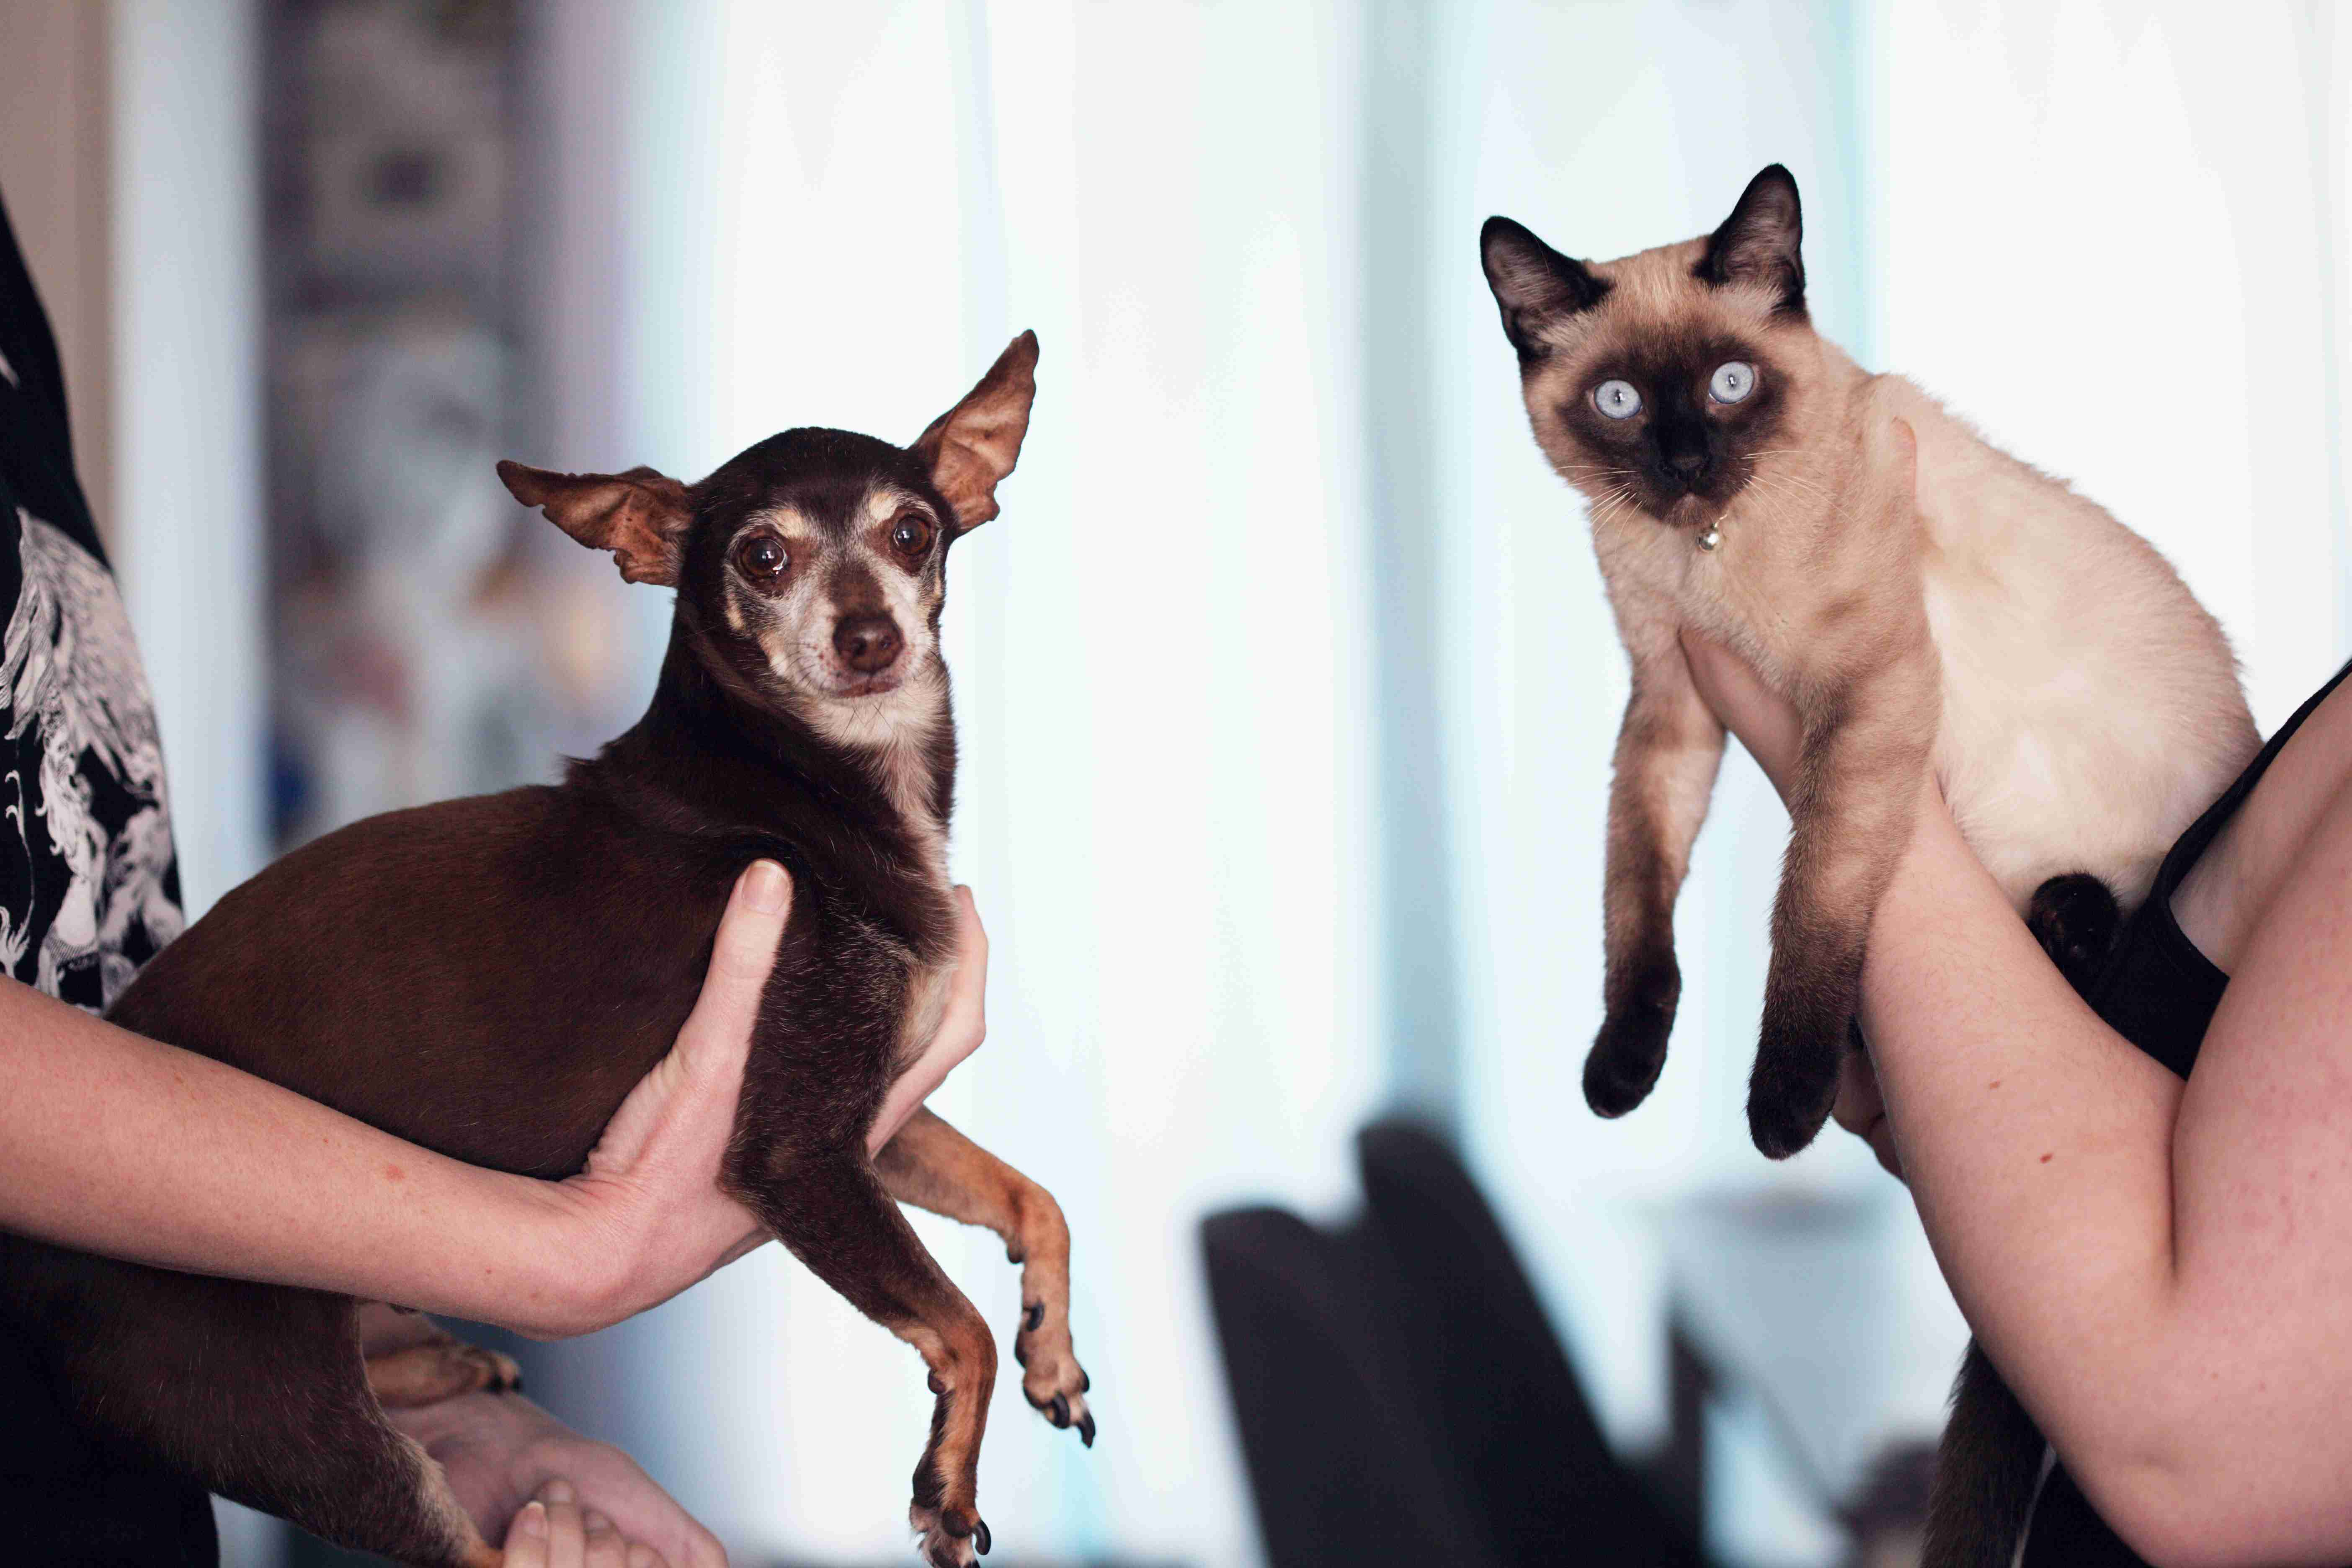 How can you respond to a Chihuahua's anger in a way that promotes trust and understanding?